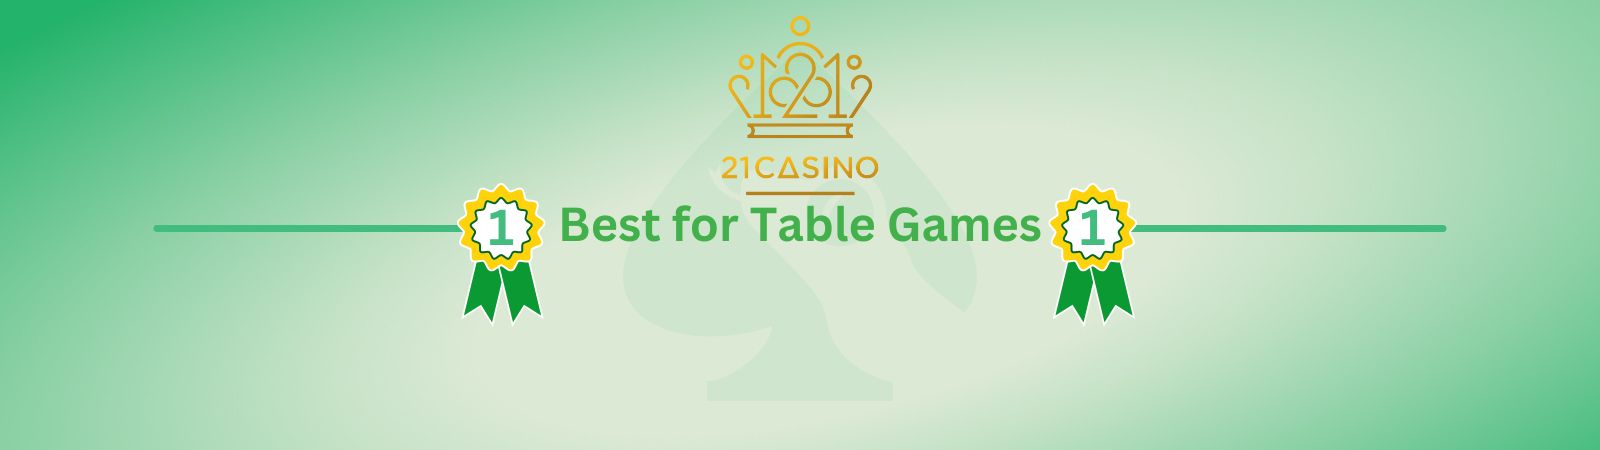 best online casino for table games